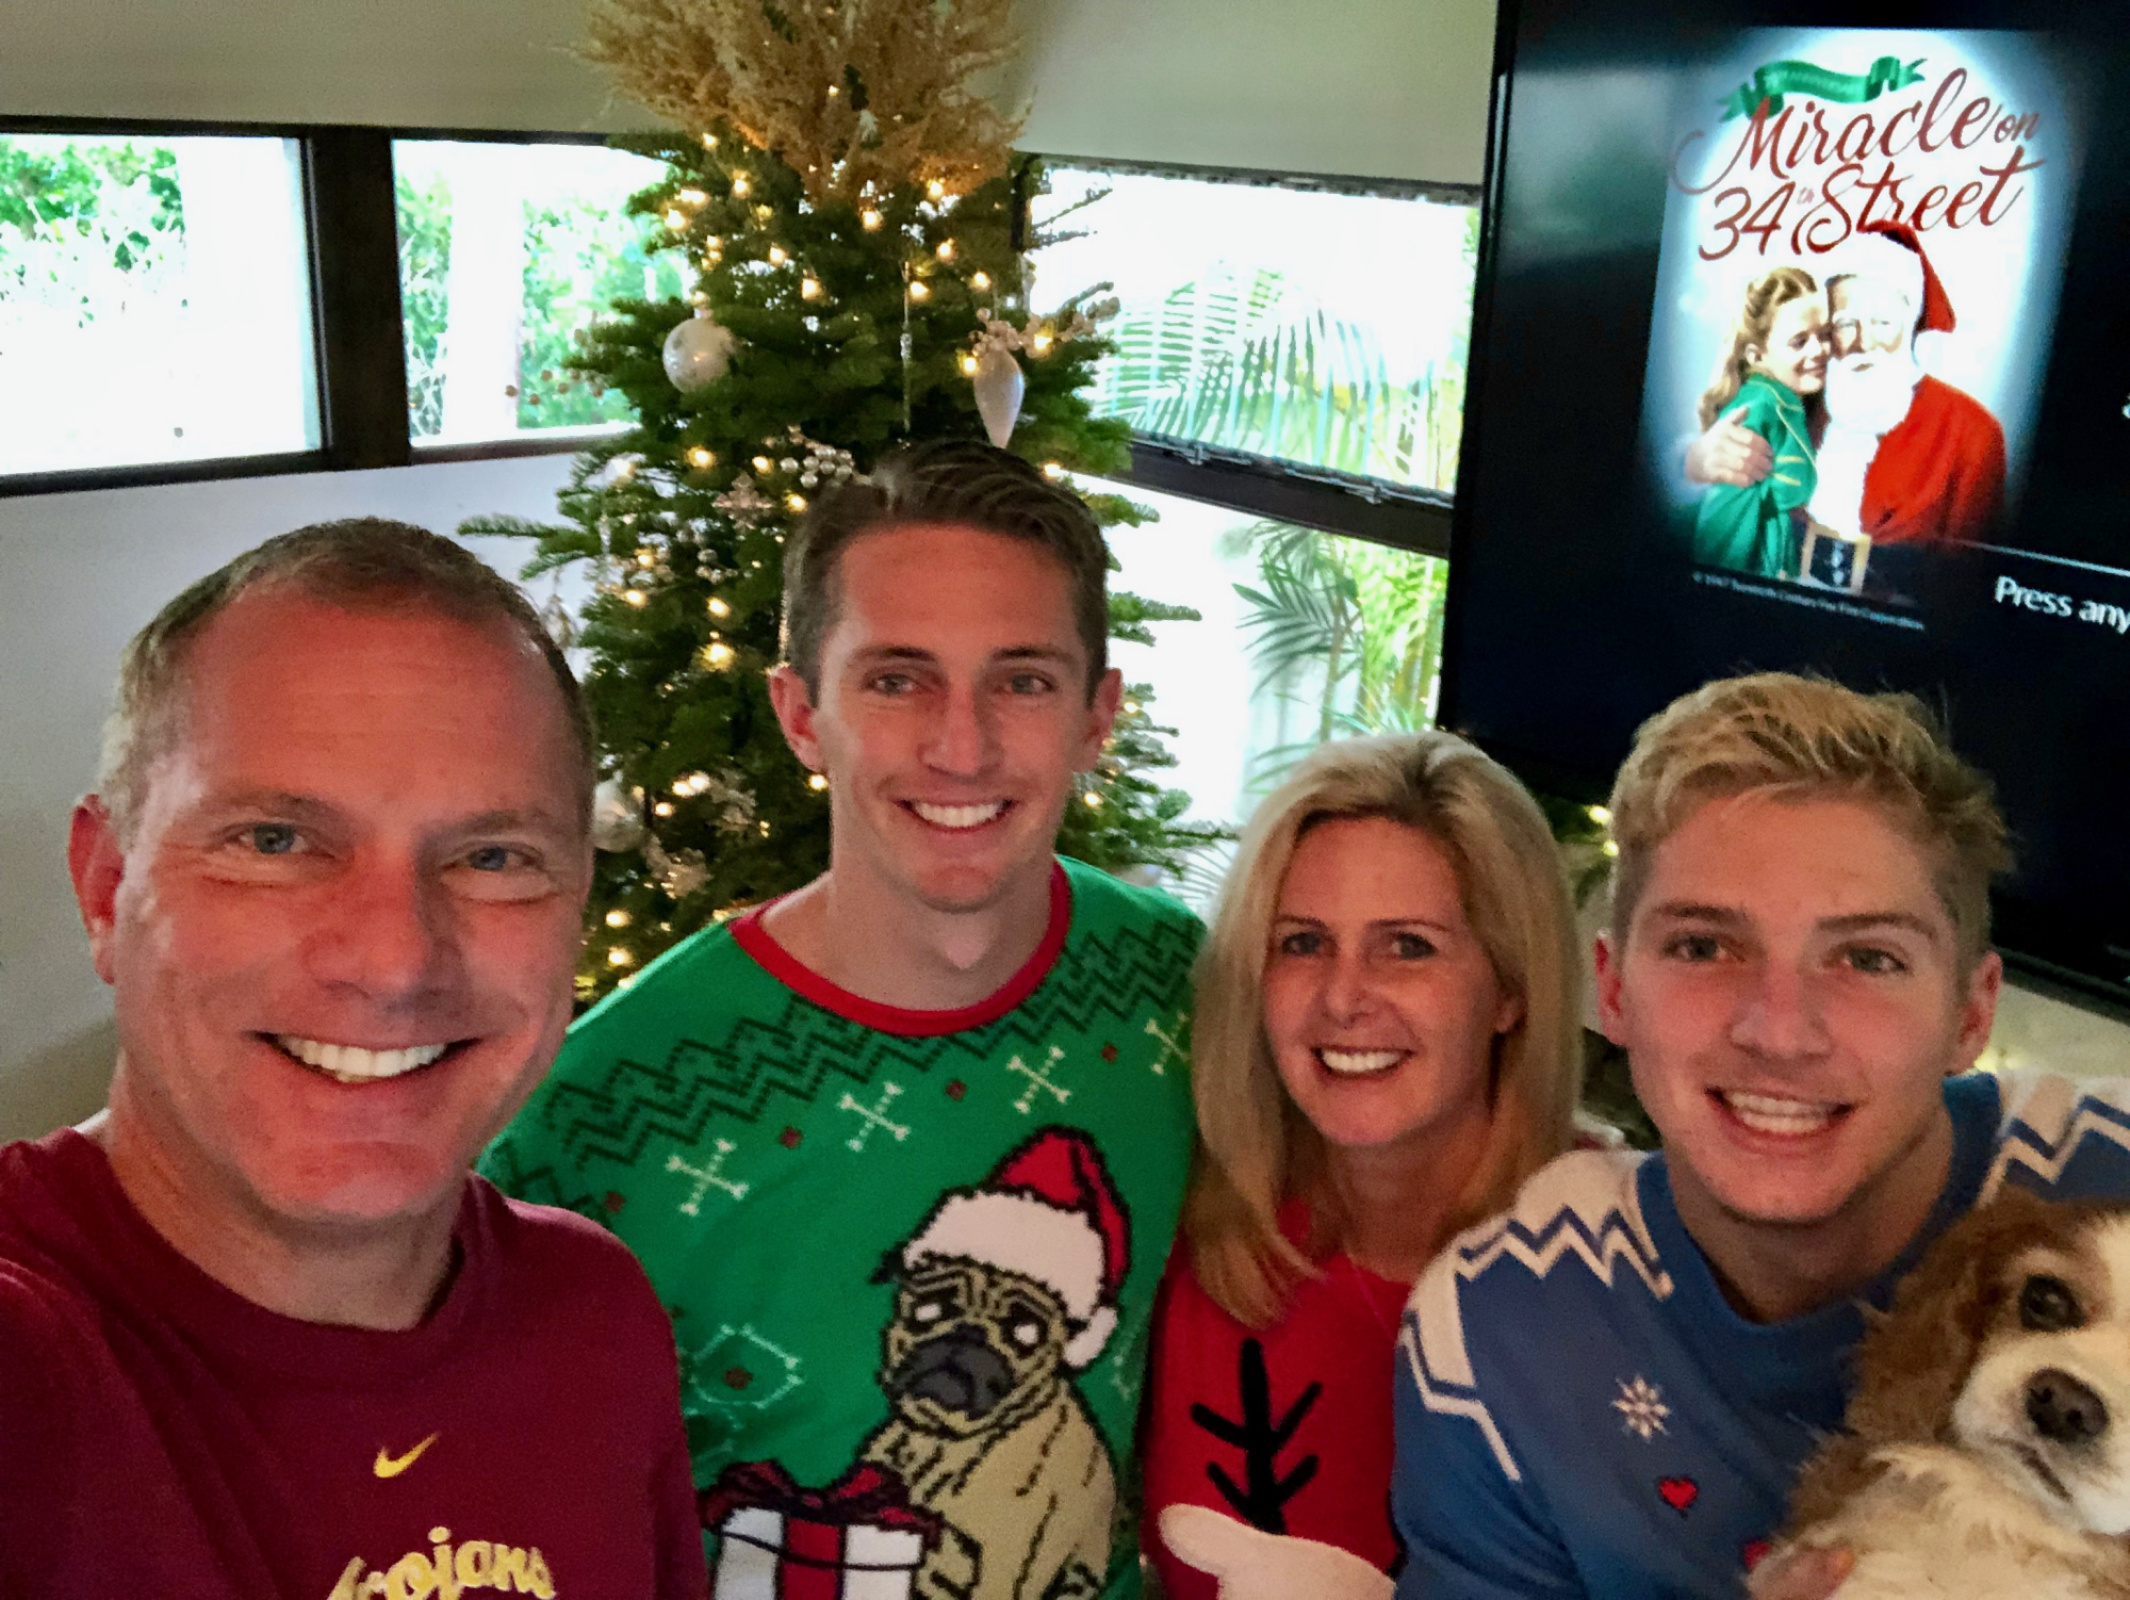 Merry Christmas from the Pflueger's!